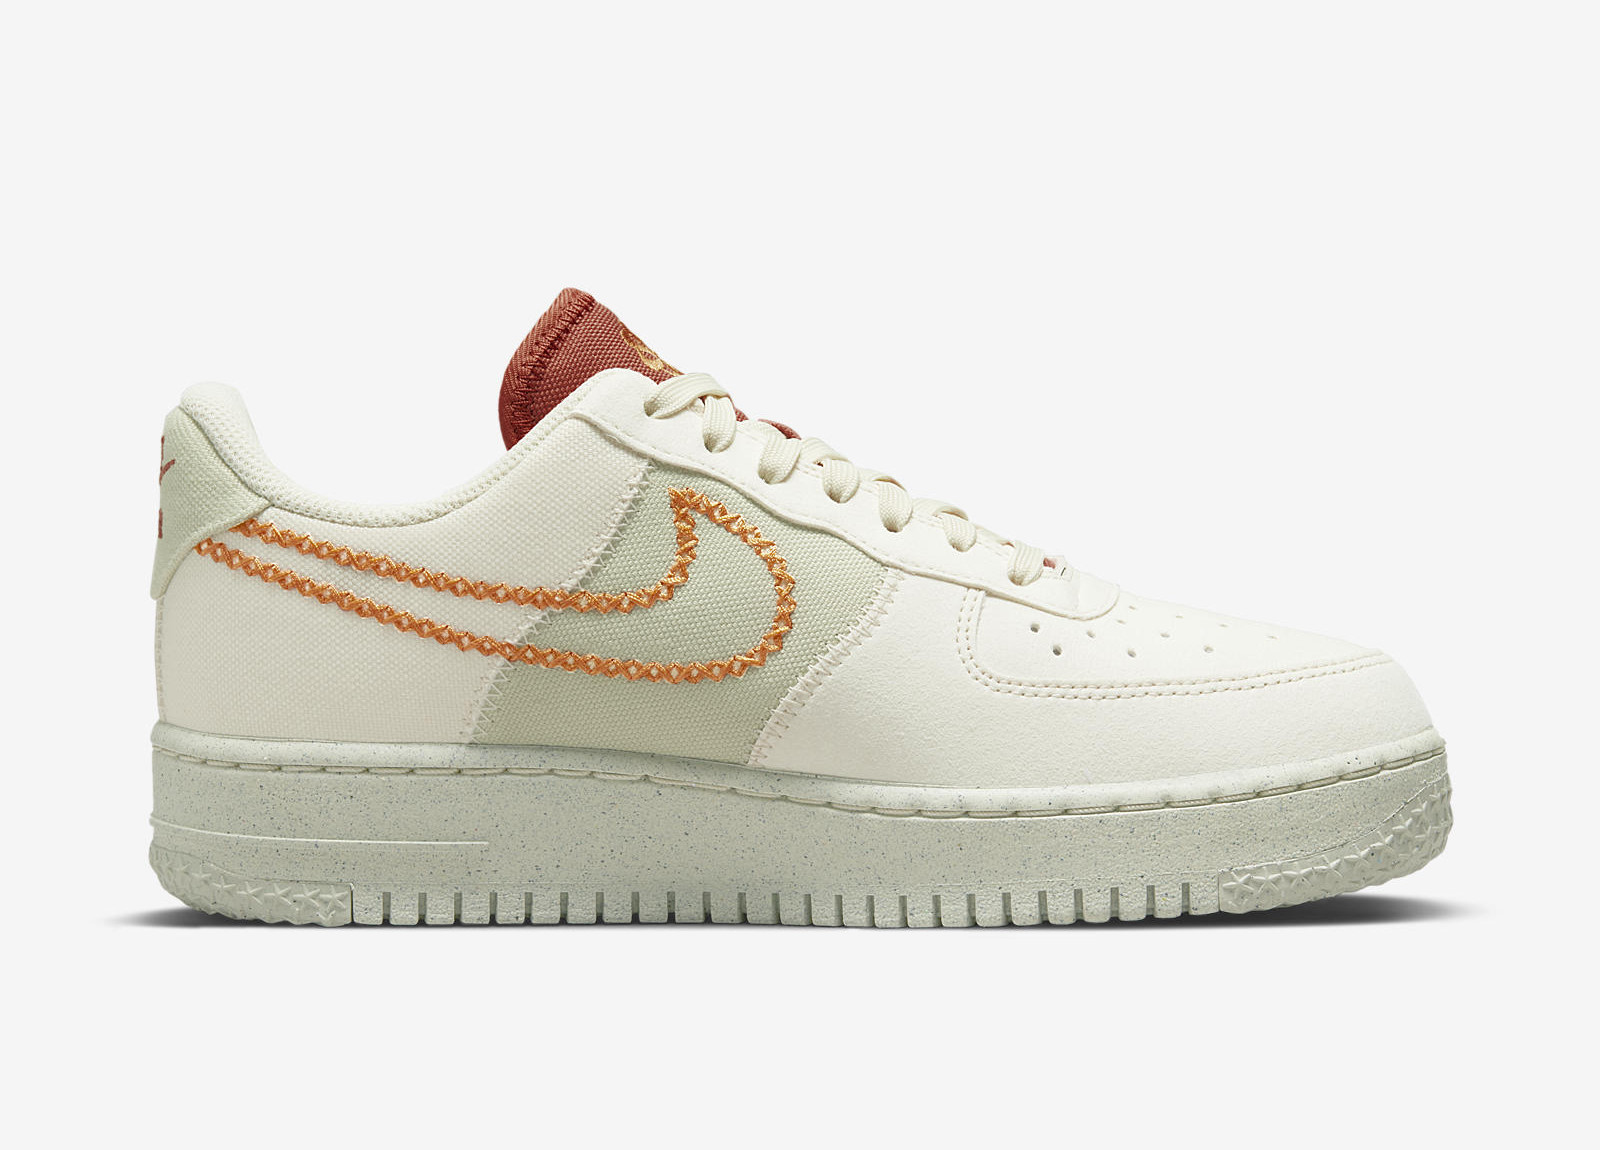 Nike Air Force 1
Next Nature
« Coconut Milk »